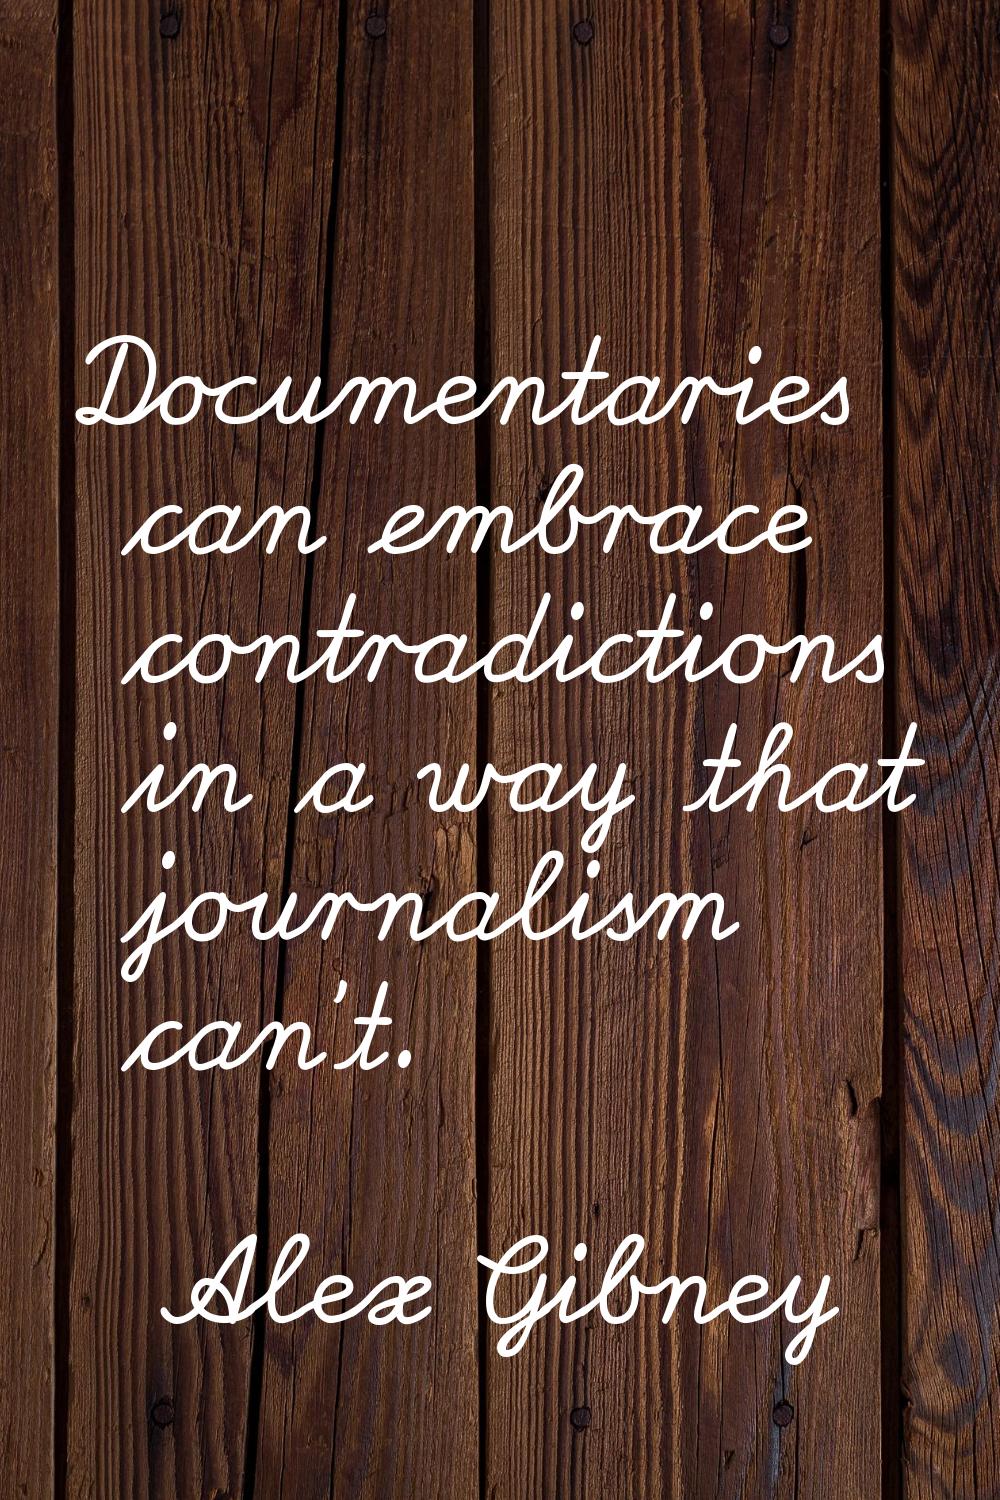 Documentaries can embrace contradictions in a way that journalism can't.